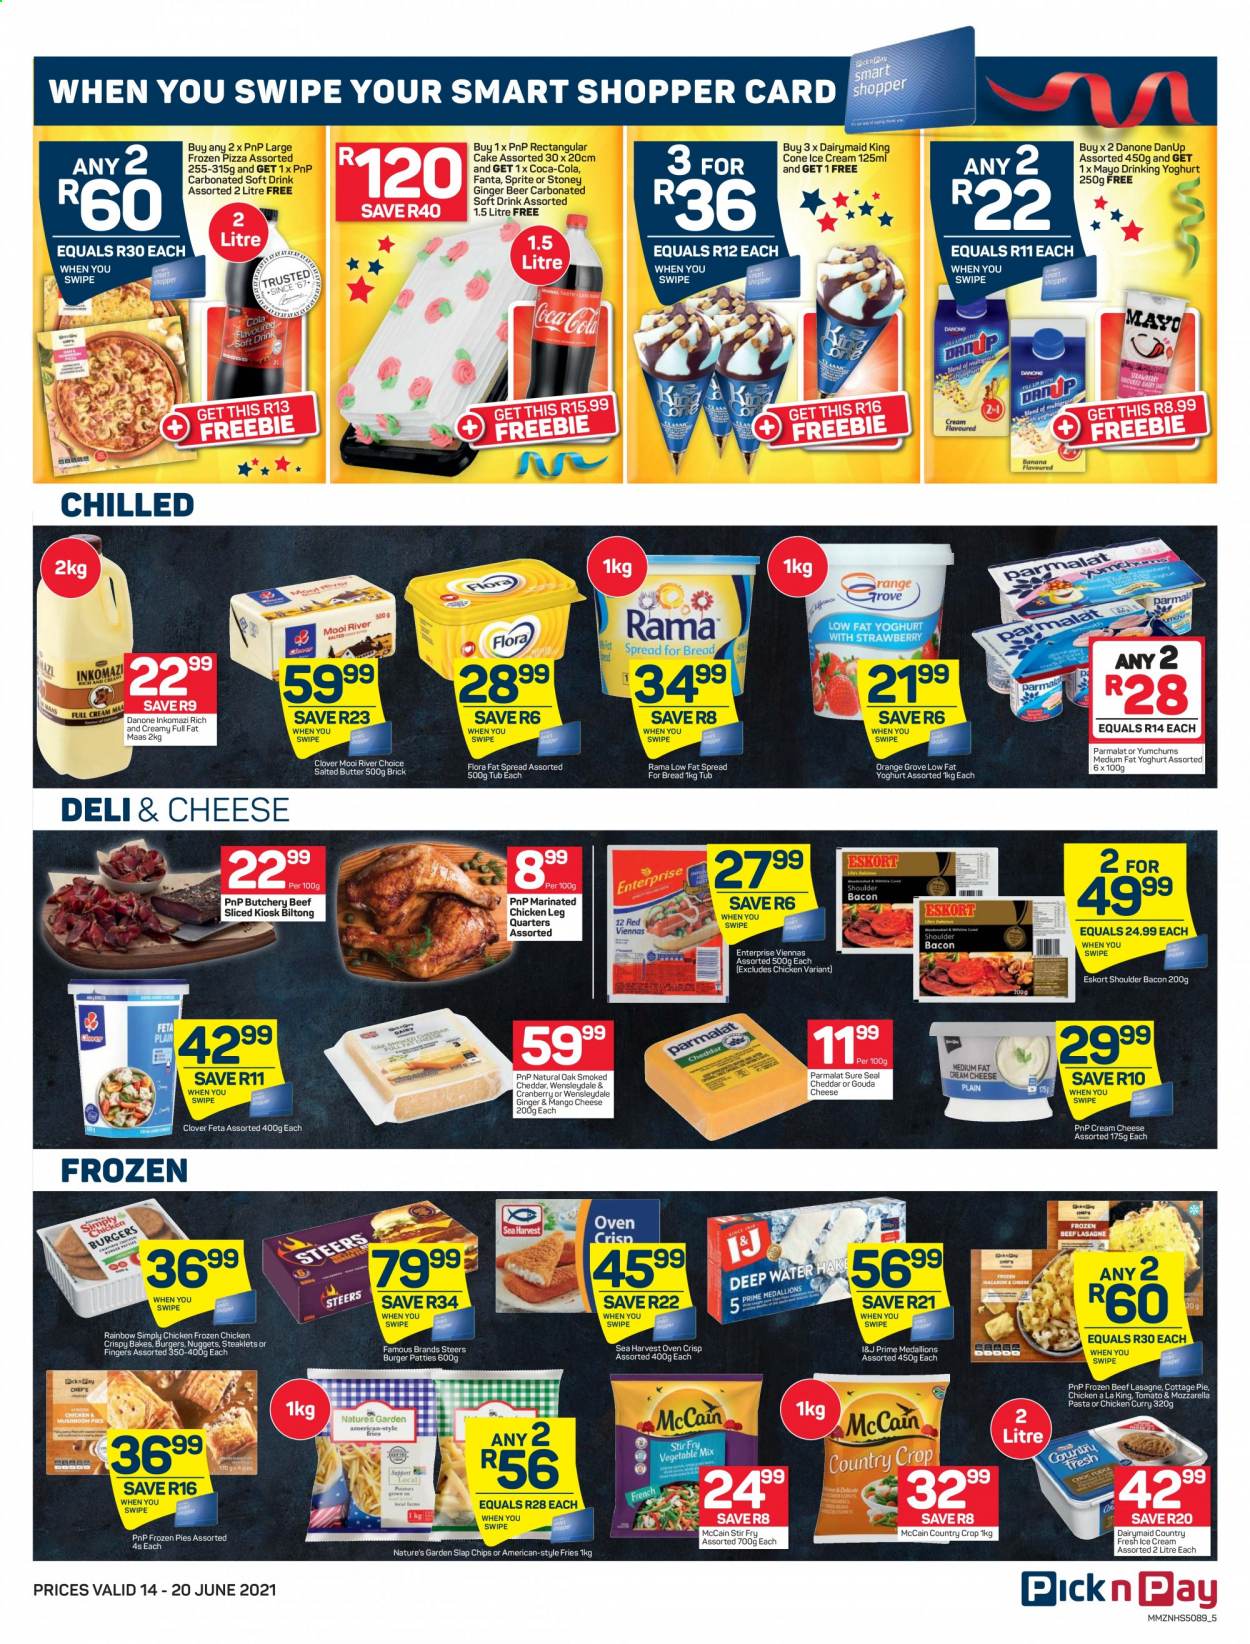 Pick n Pay specials - 06.14.2021 - 06.20.2021. 